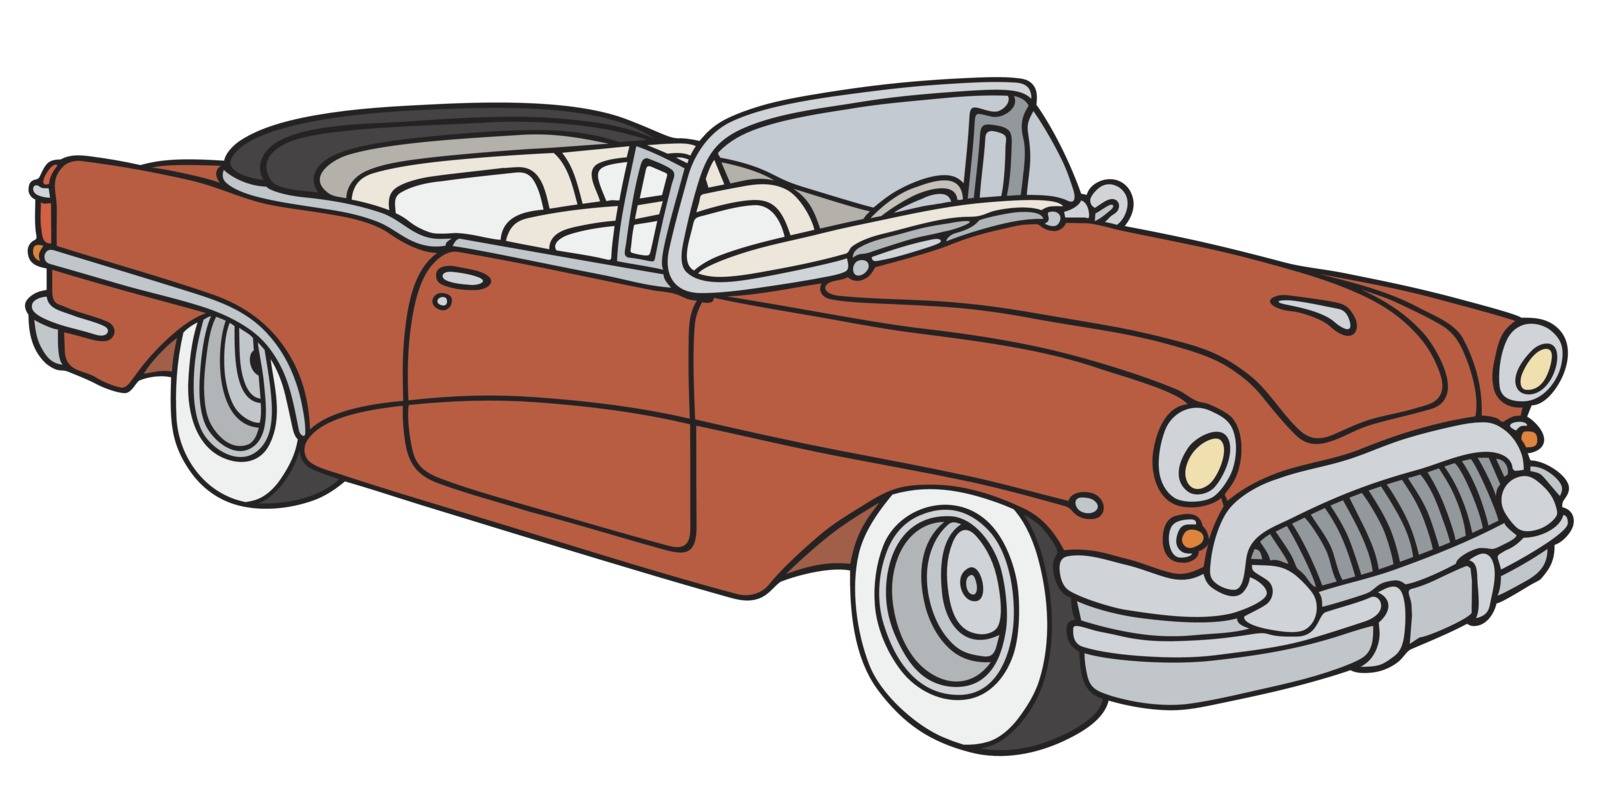 Hand drawing of a classic red american cabriolet - not a real model